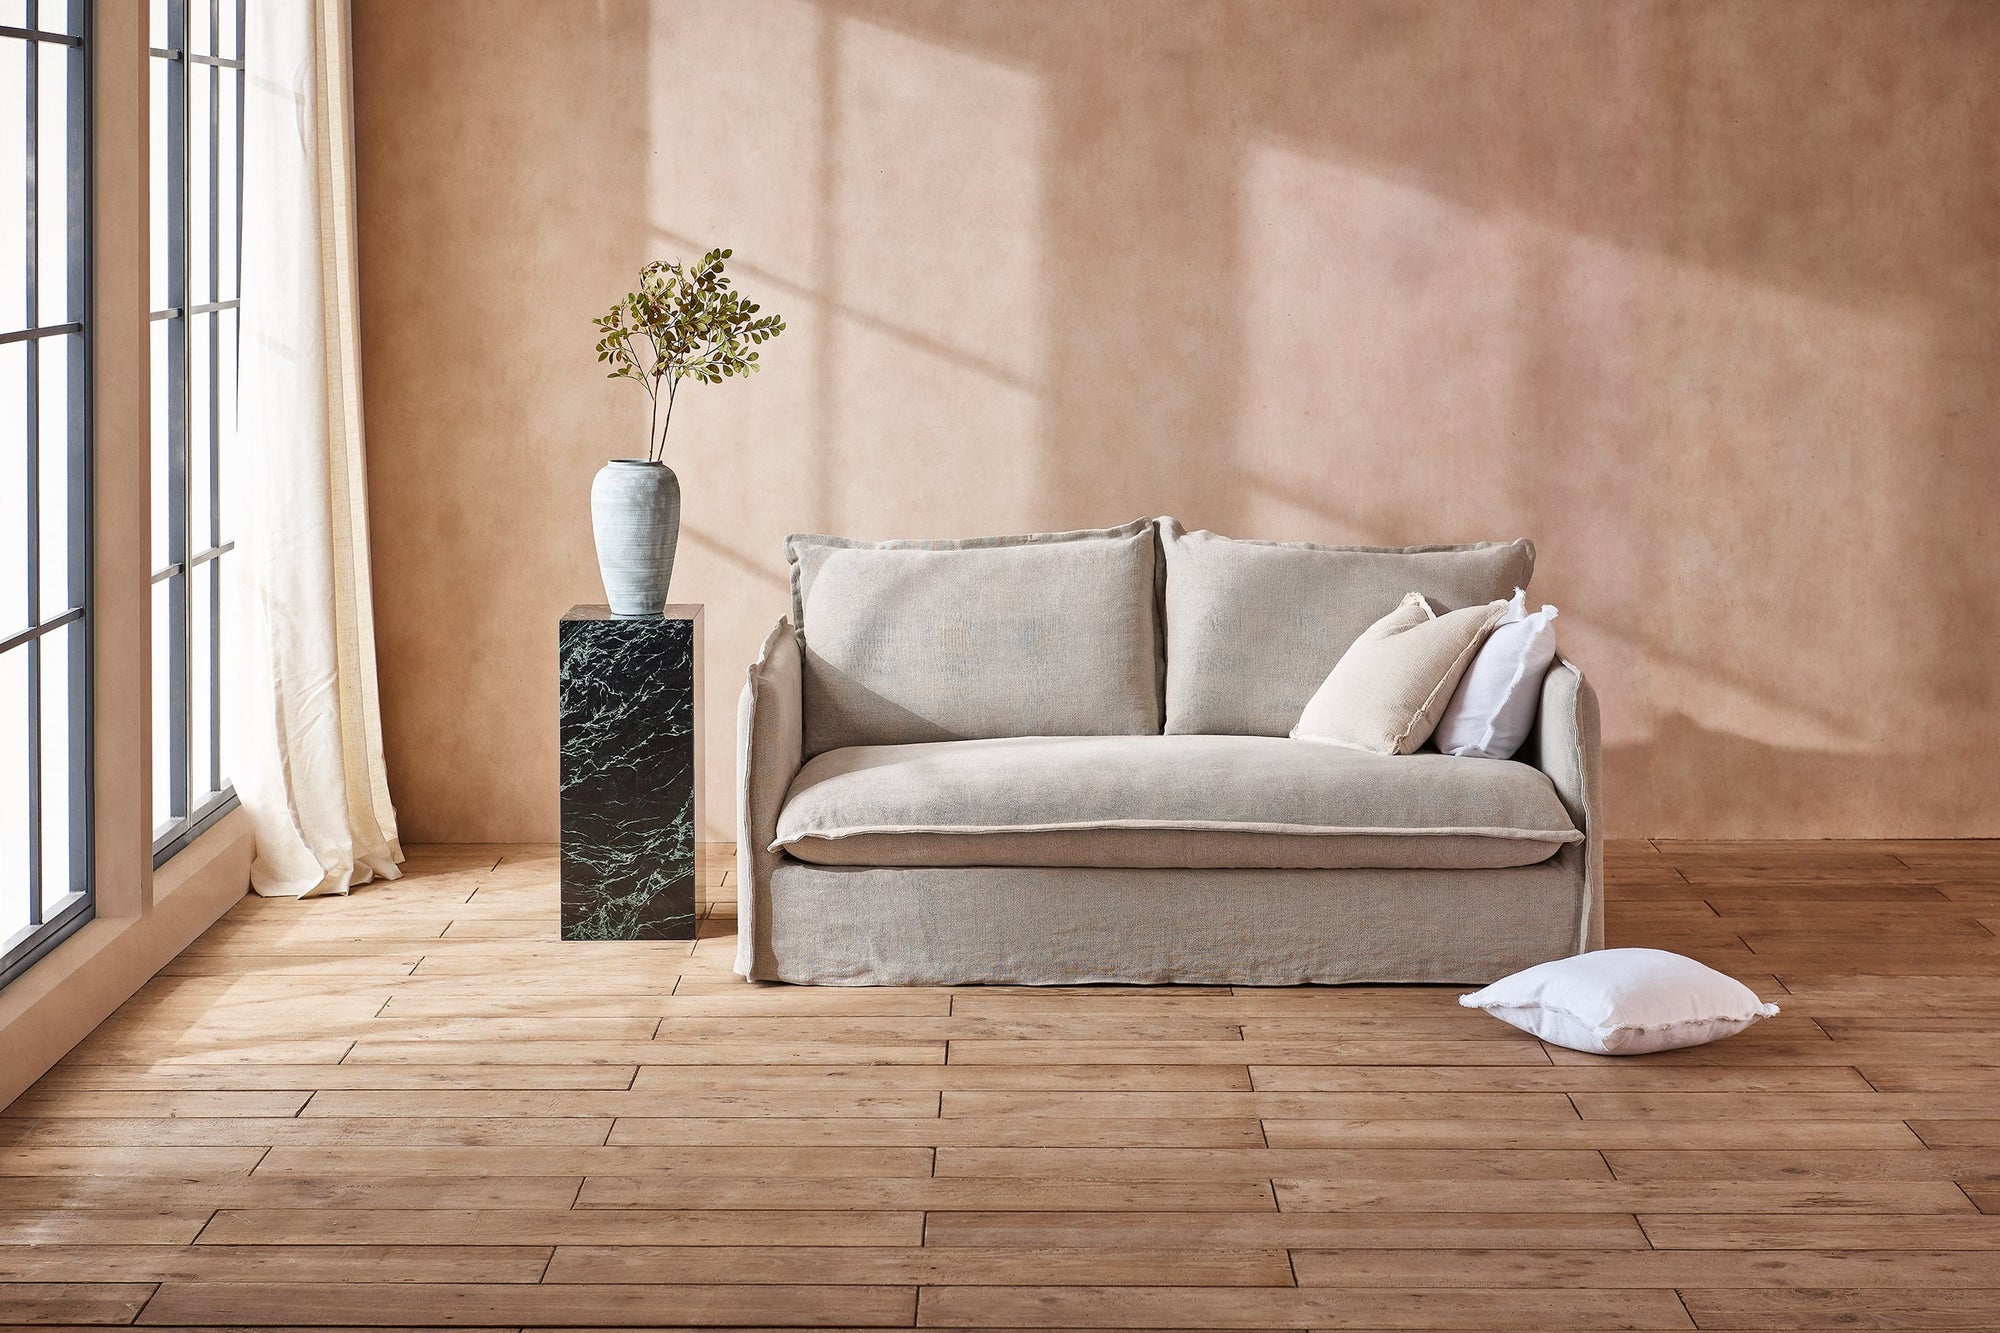 Neva 72" Sofa in Jasmine Rice, a light warm greige Medium Weight Linen, placed in a sunlit room next to a plant in a vase on a decorative pillow